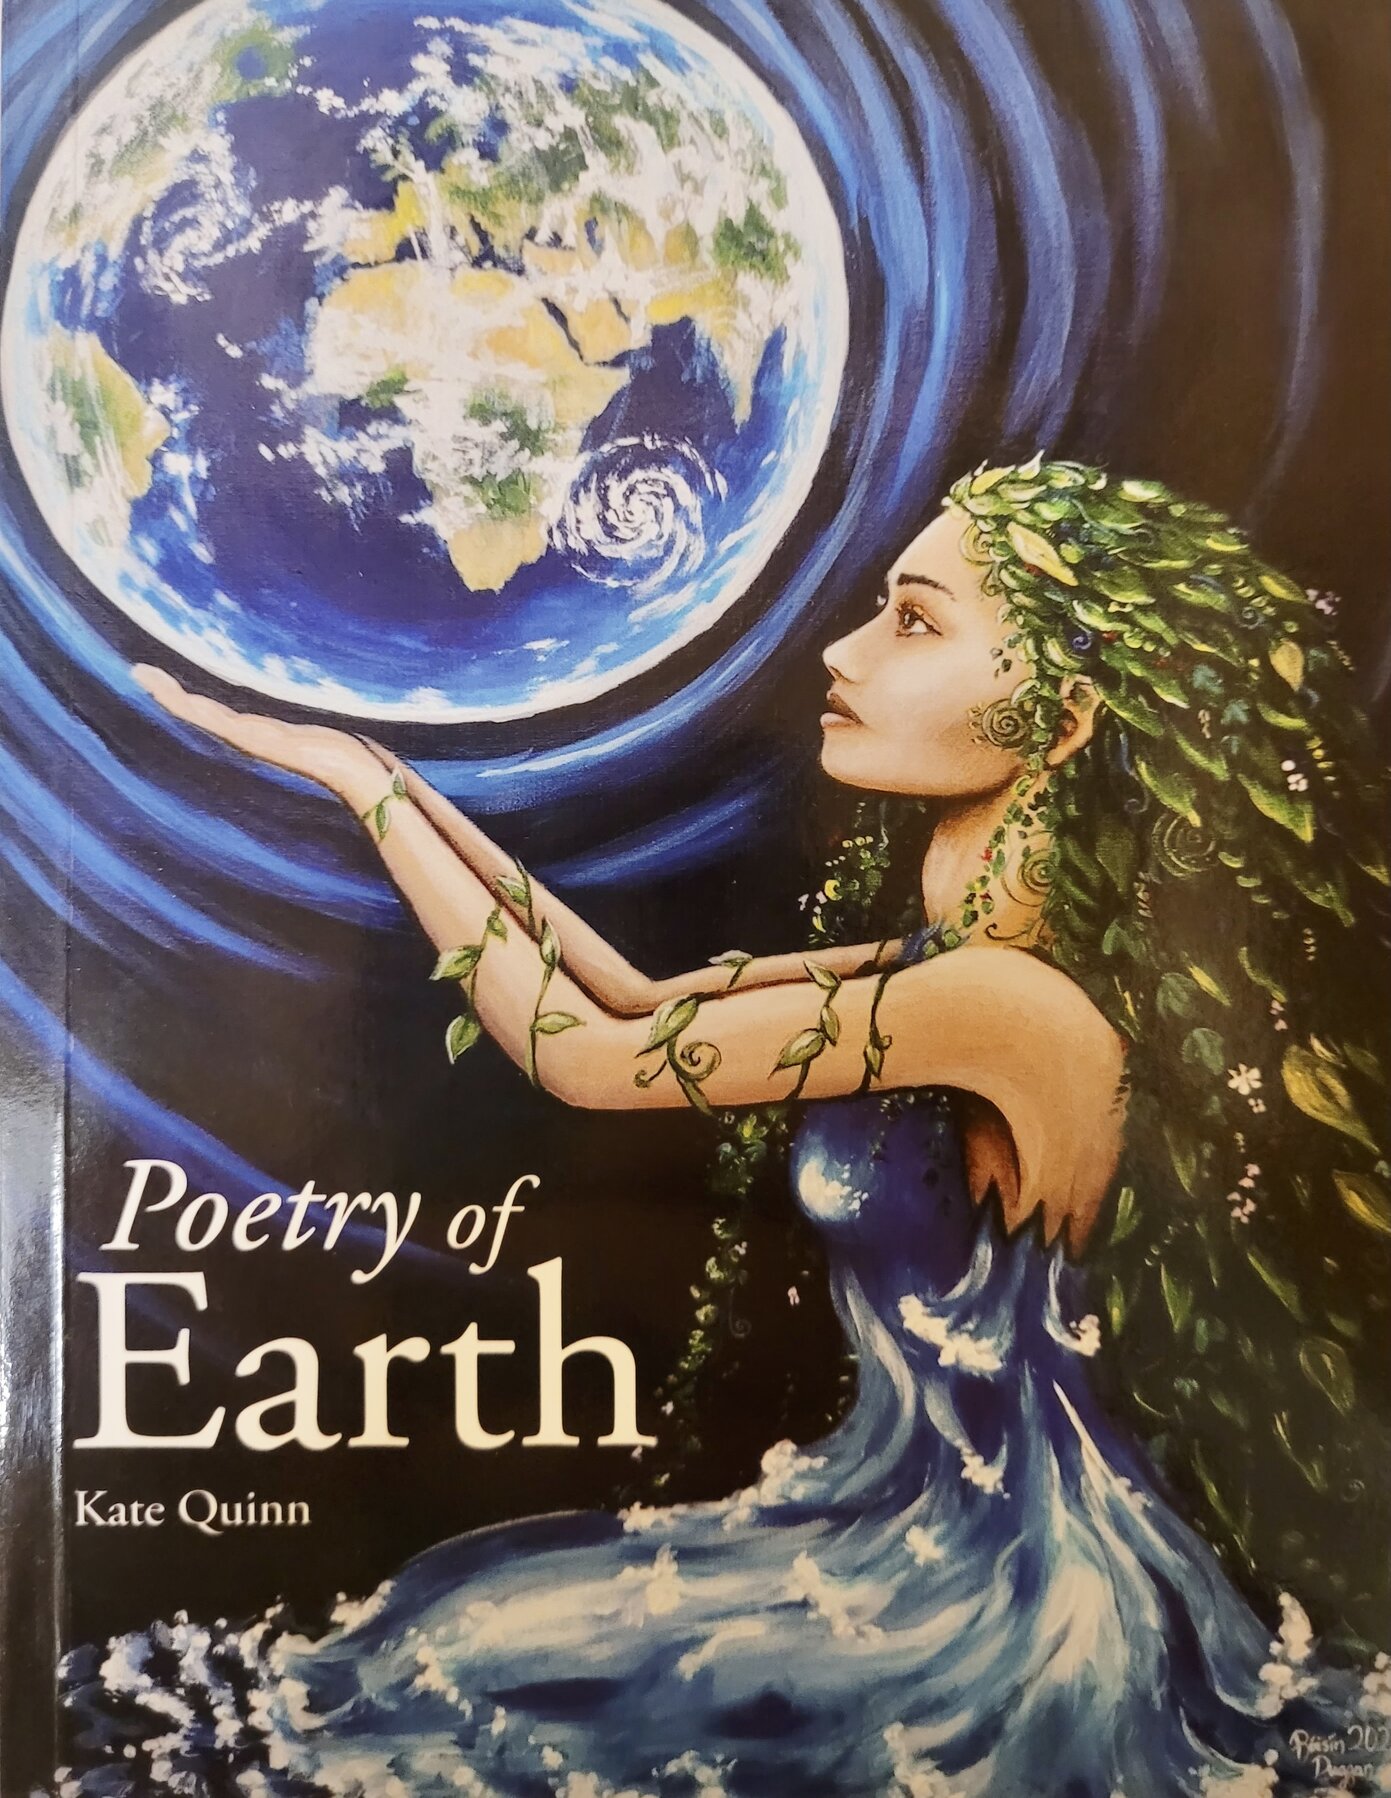 Poetry of Earth by Kate Quinn